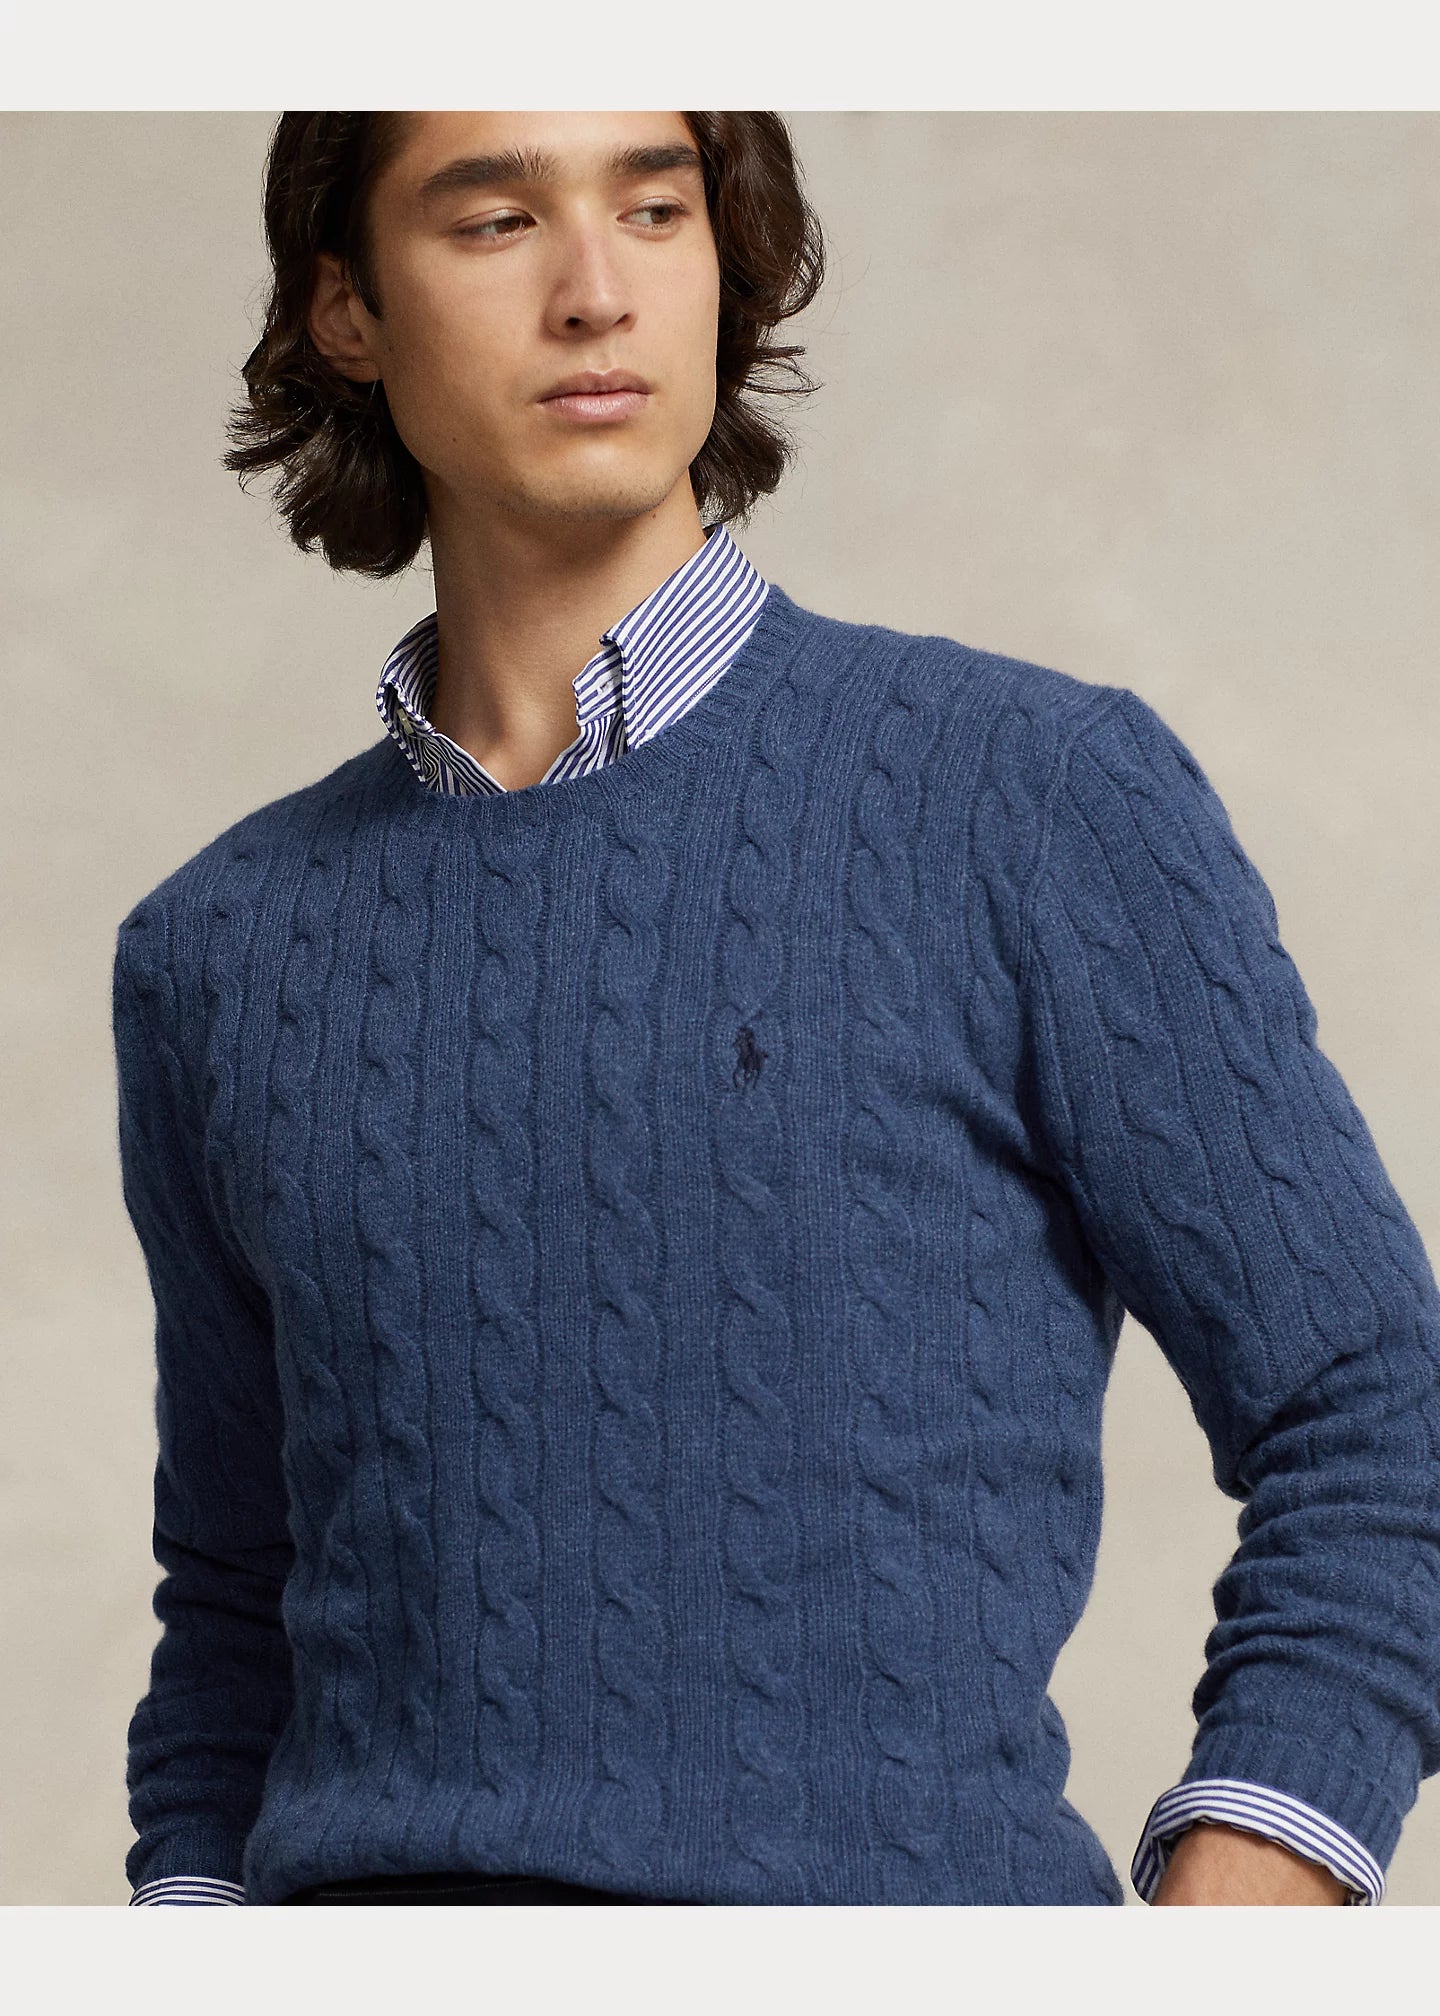 POLO RALPH LAUREN CABLE-KNIT WOOL-CASHMERE CARDIGAN